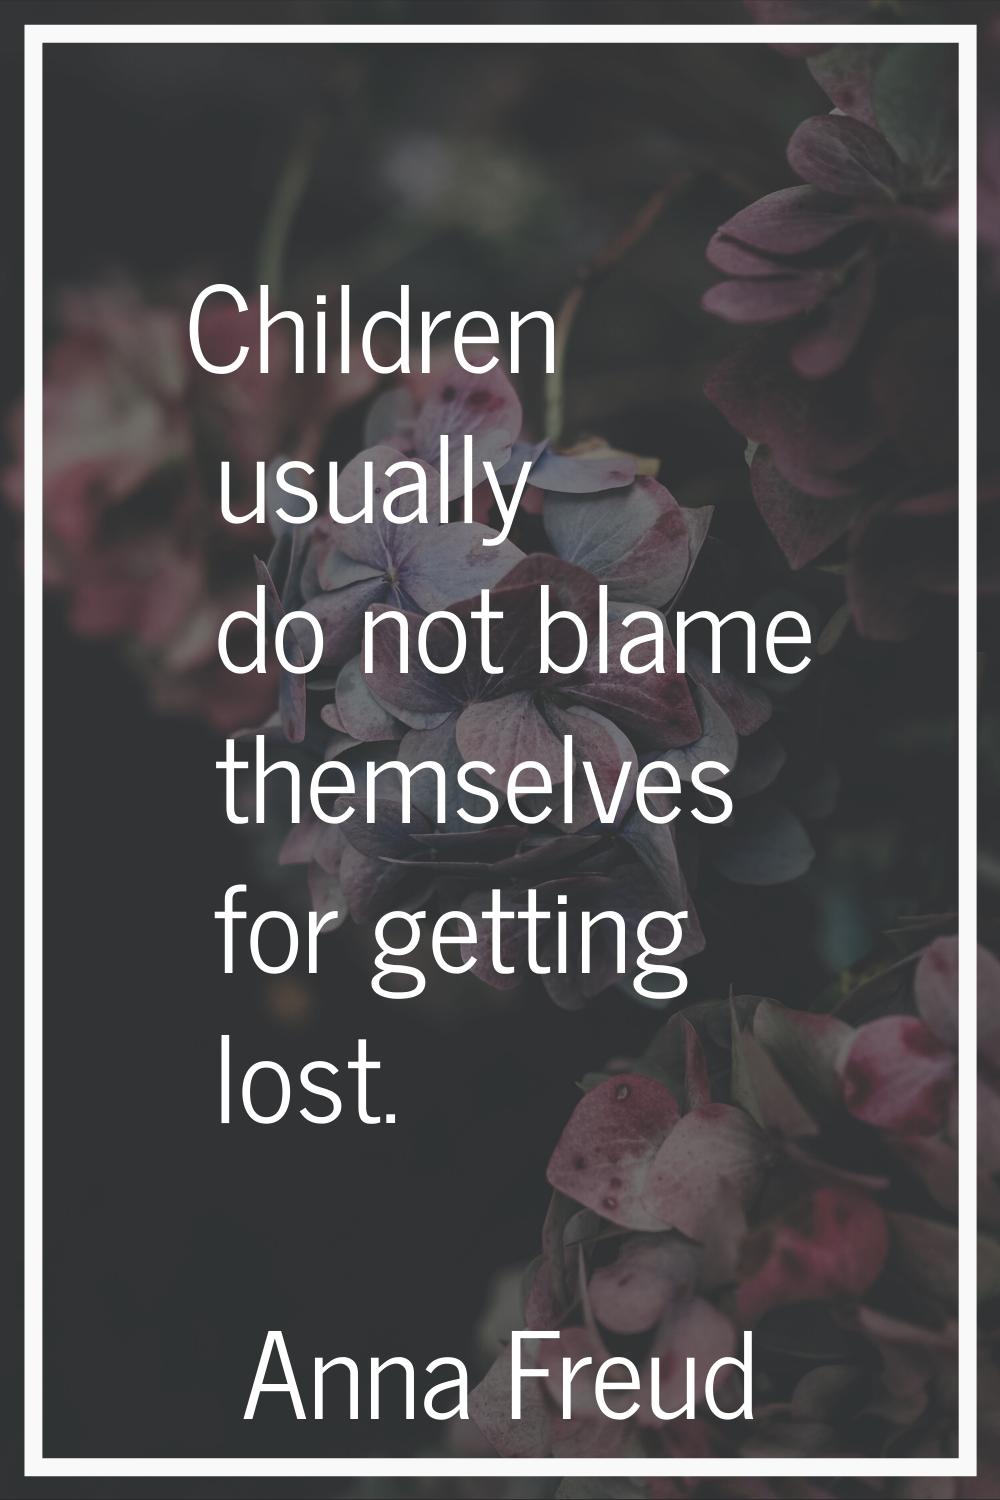 Children usually do not blame themselves for getting lost.